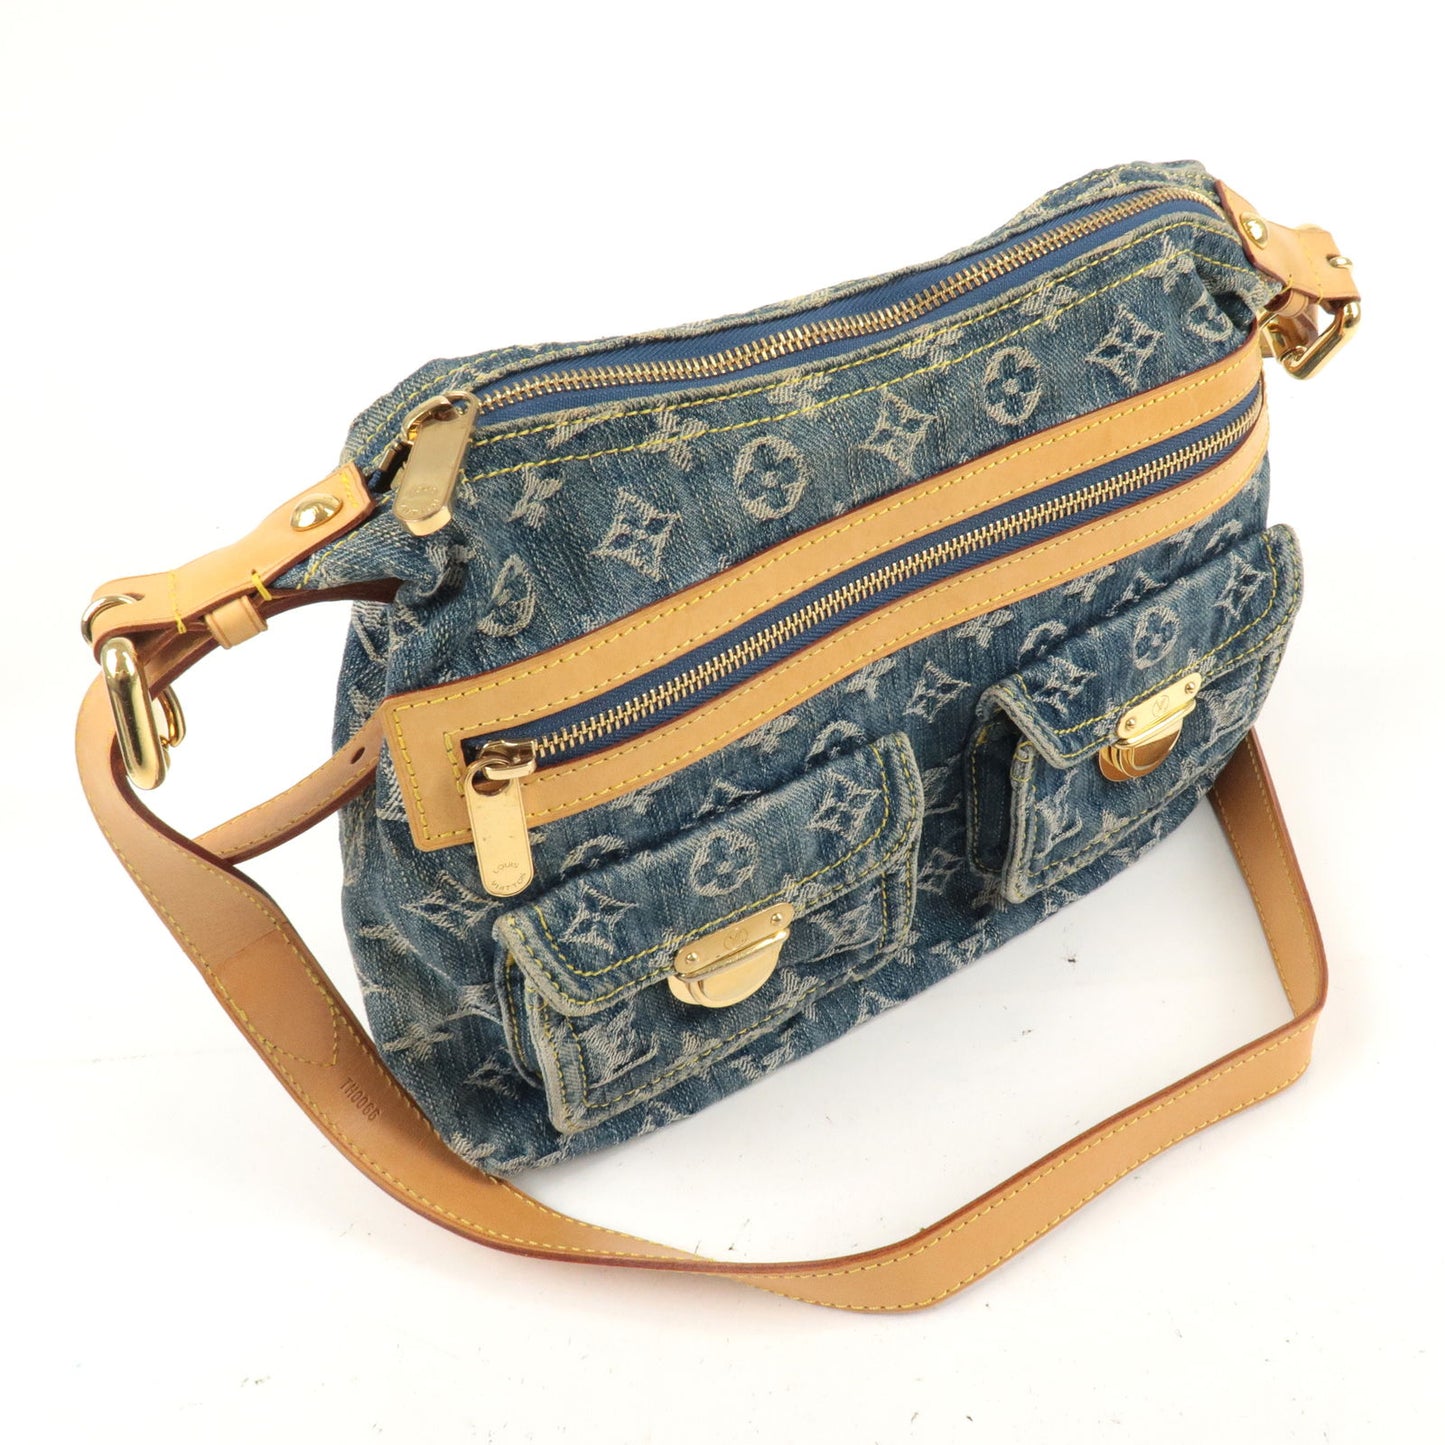 The Louis Vuitton denim Baggy is currently my FAVE summer bag. Looking